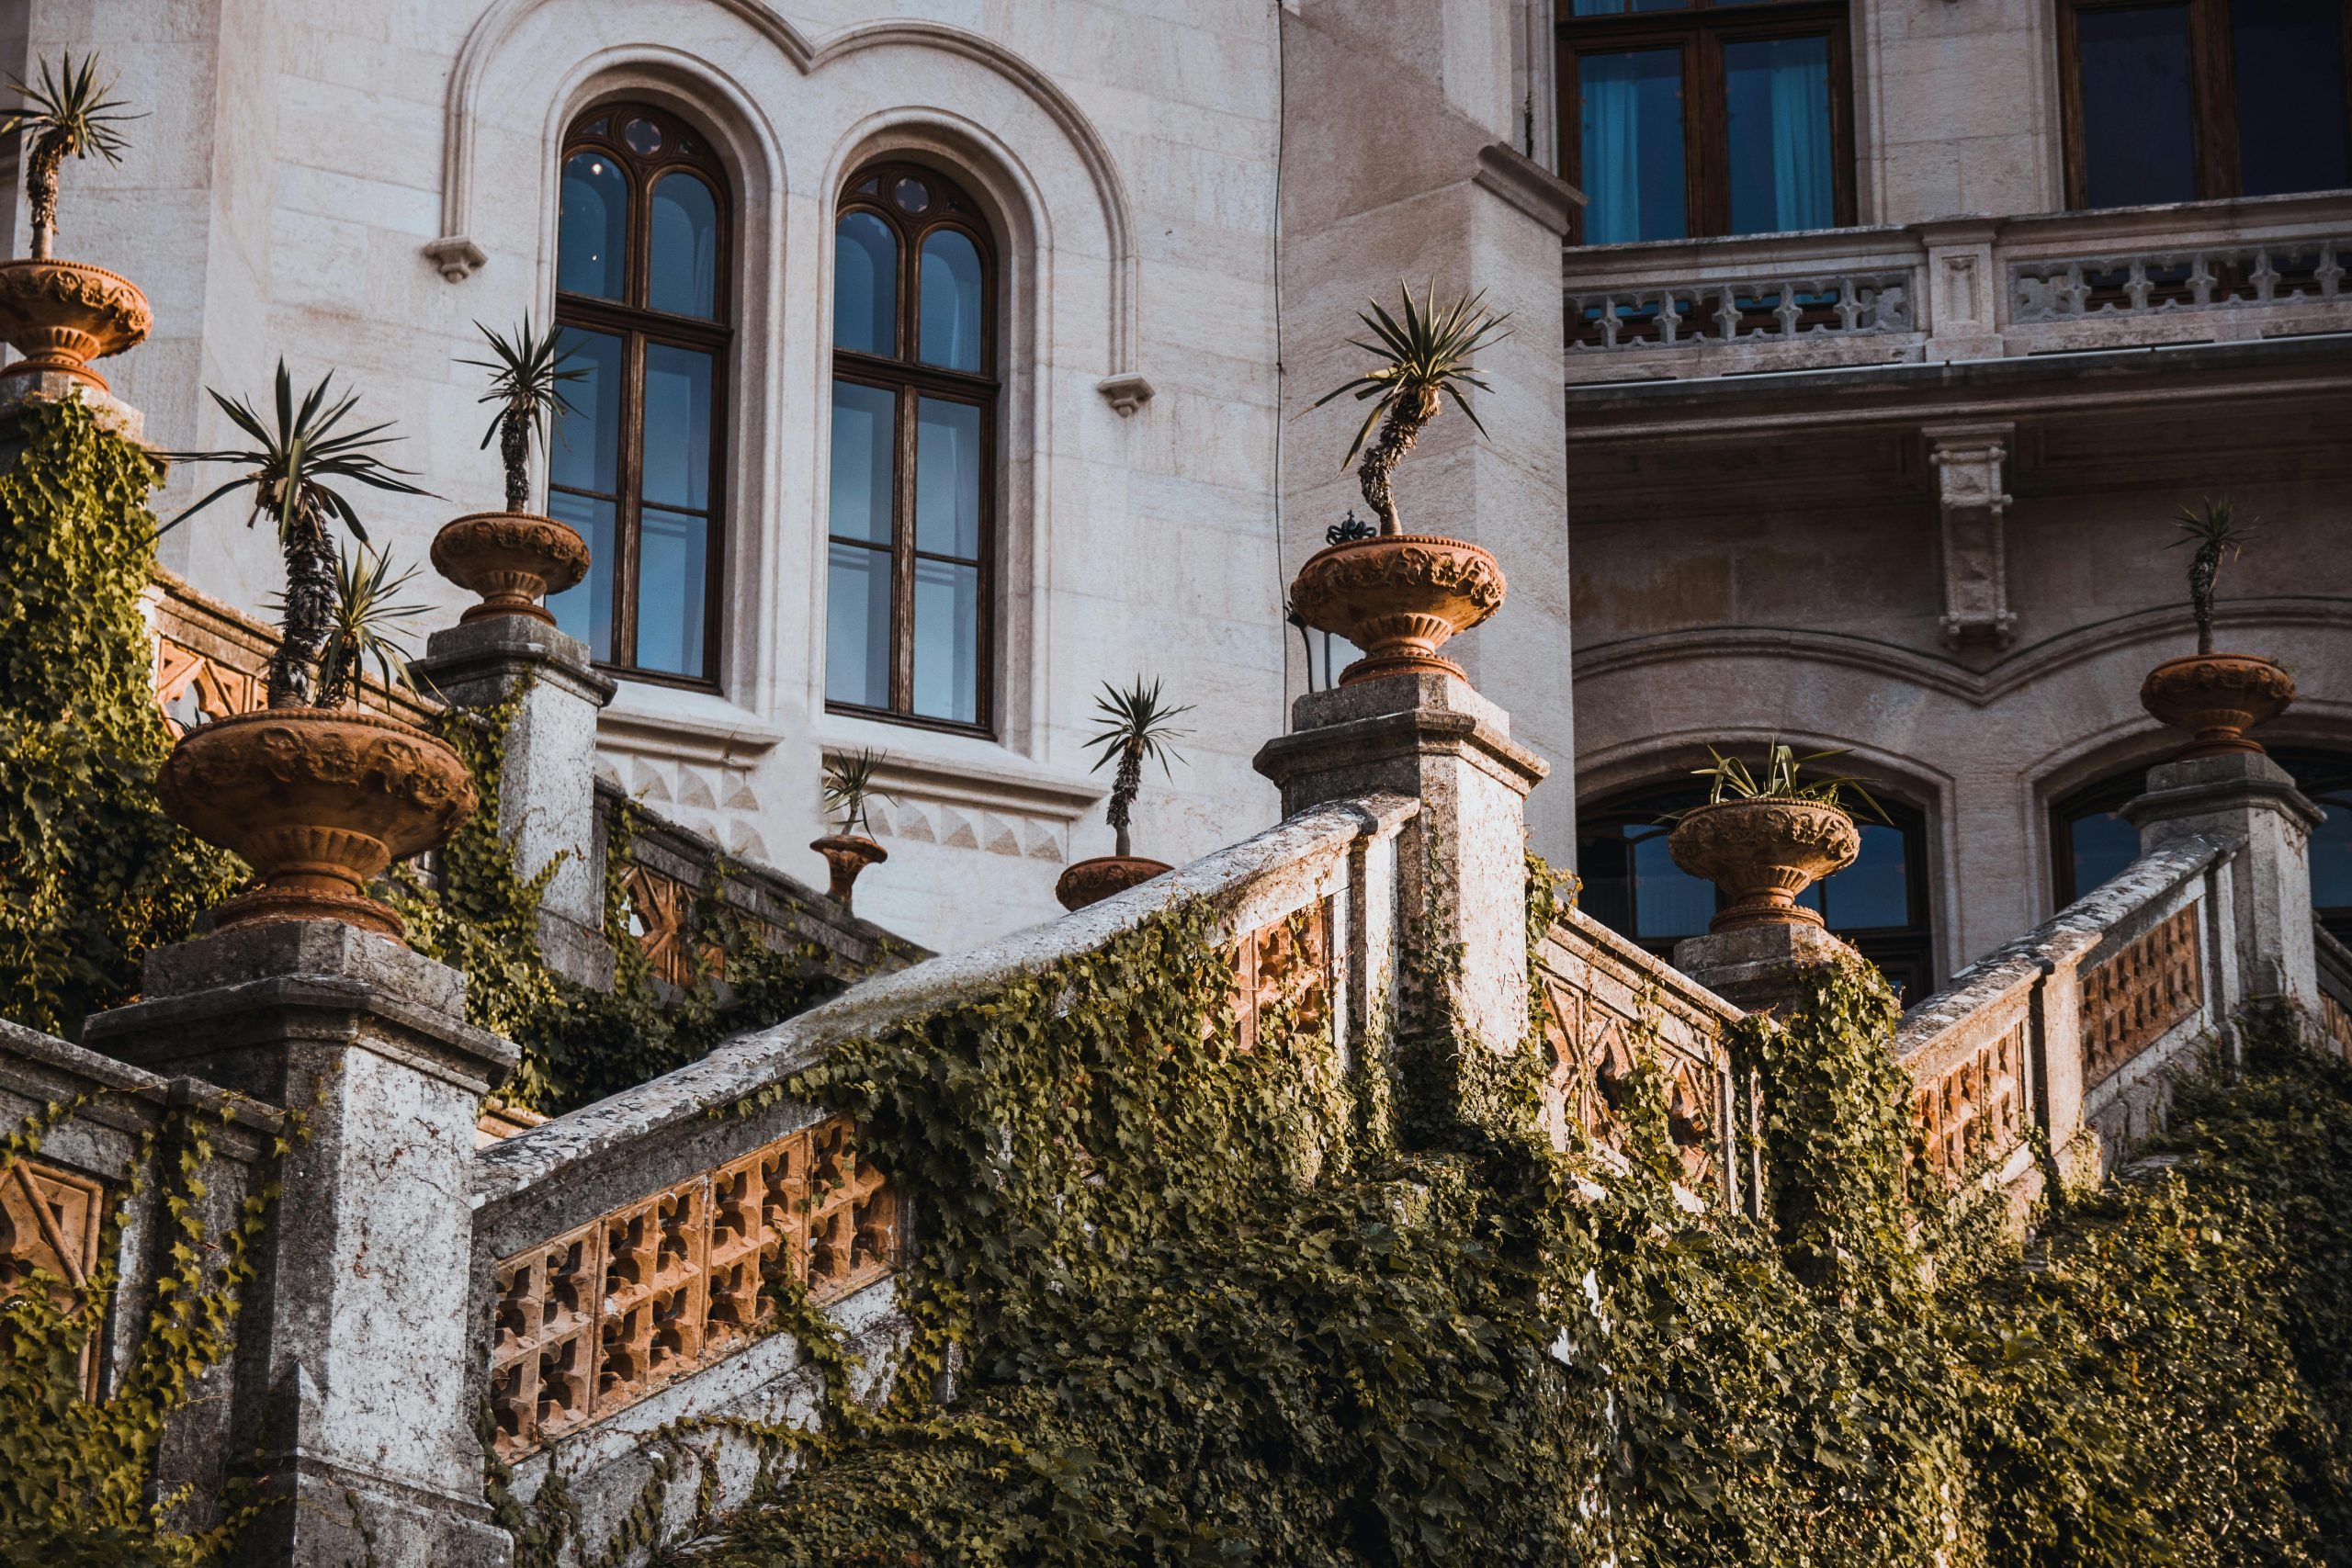 Historical Context and Evolution of Mediterranean Architecture